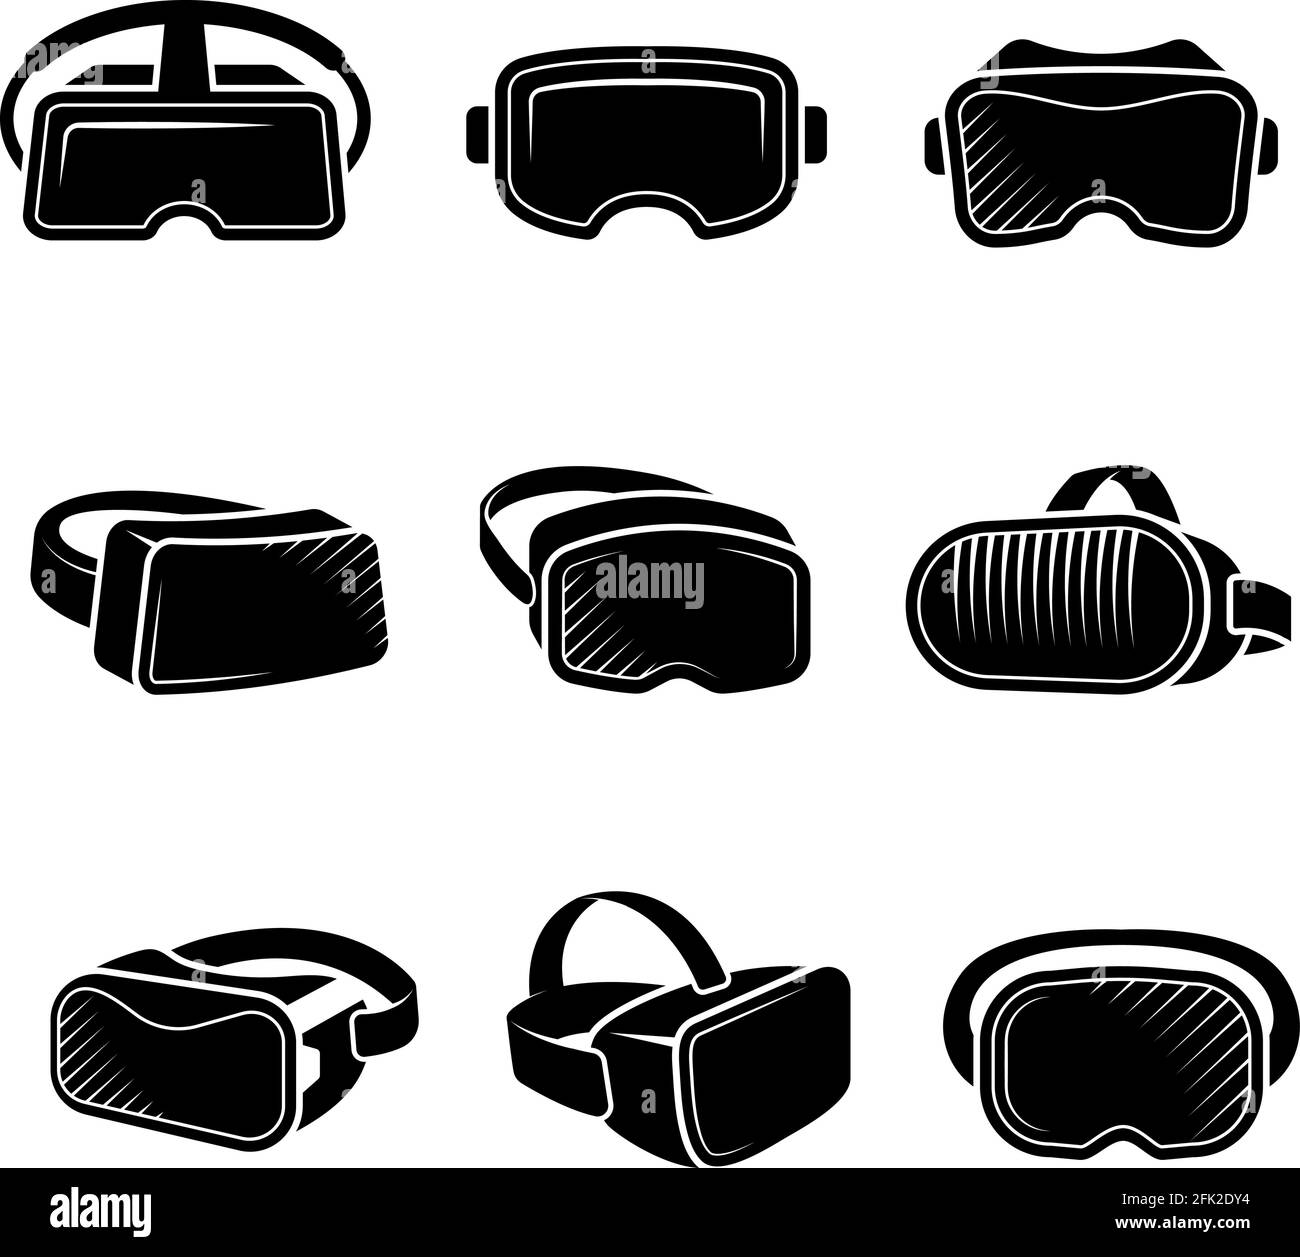 Virtual reality helmet. Vr future technology for gaming attractions entertainment headset vector logo design set Stock Vector